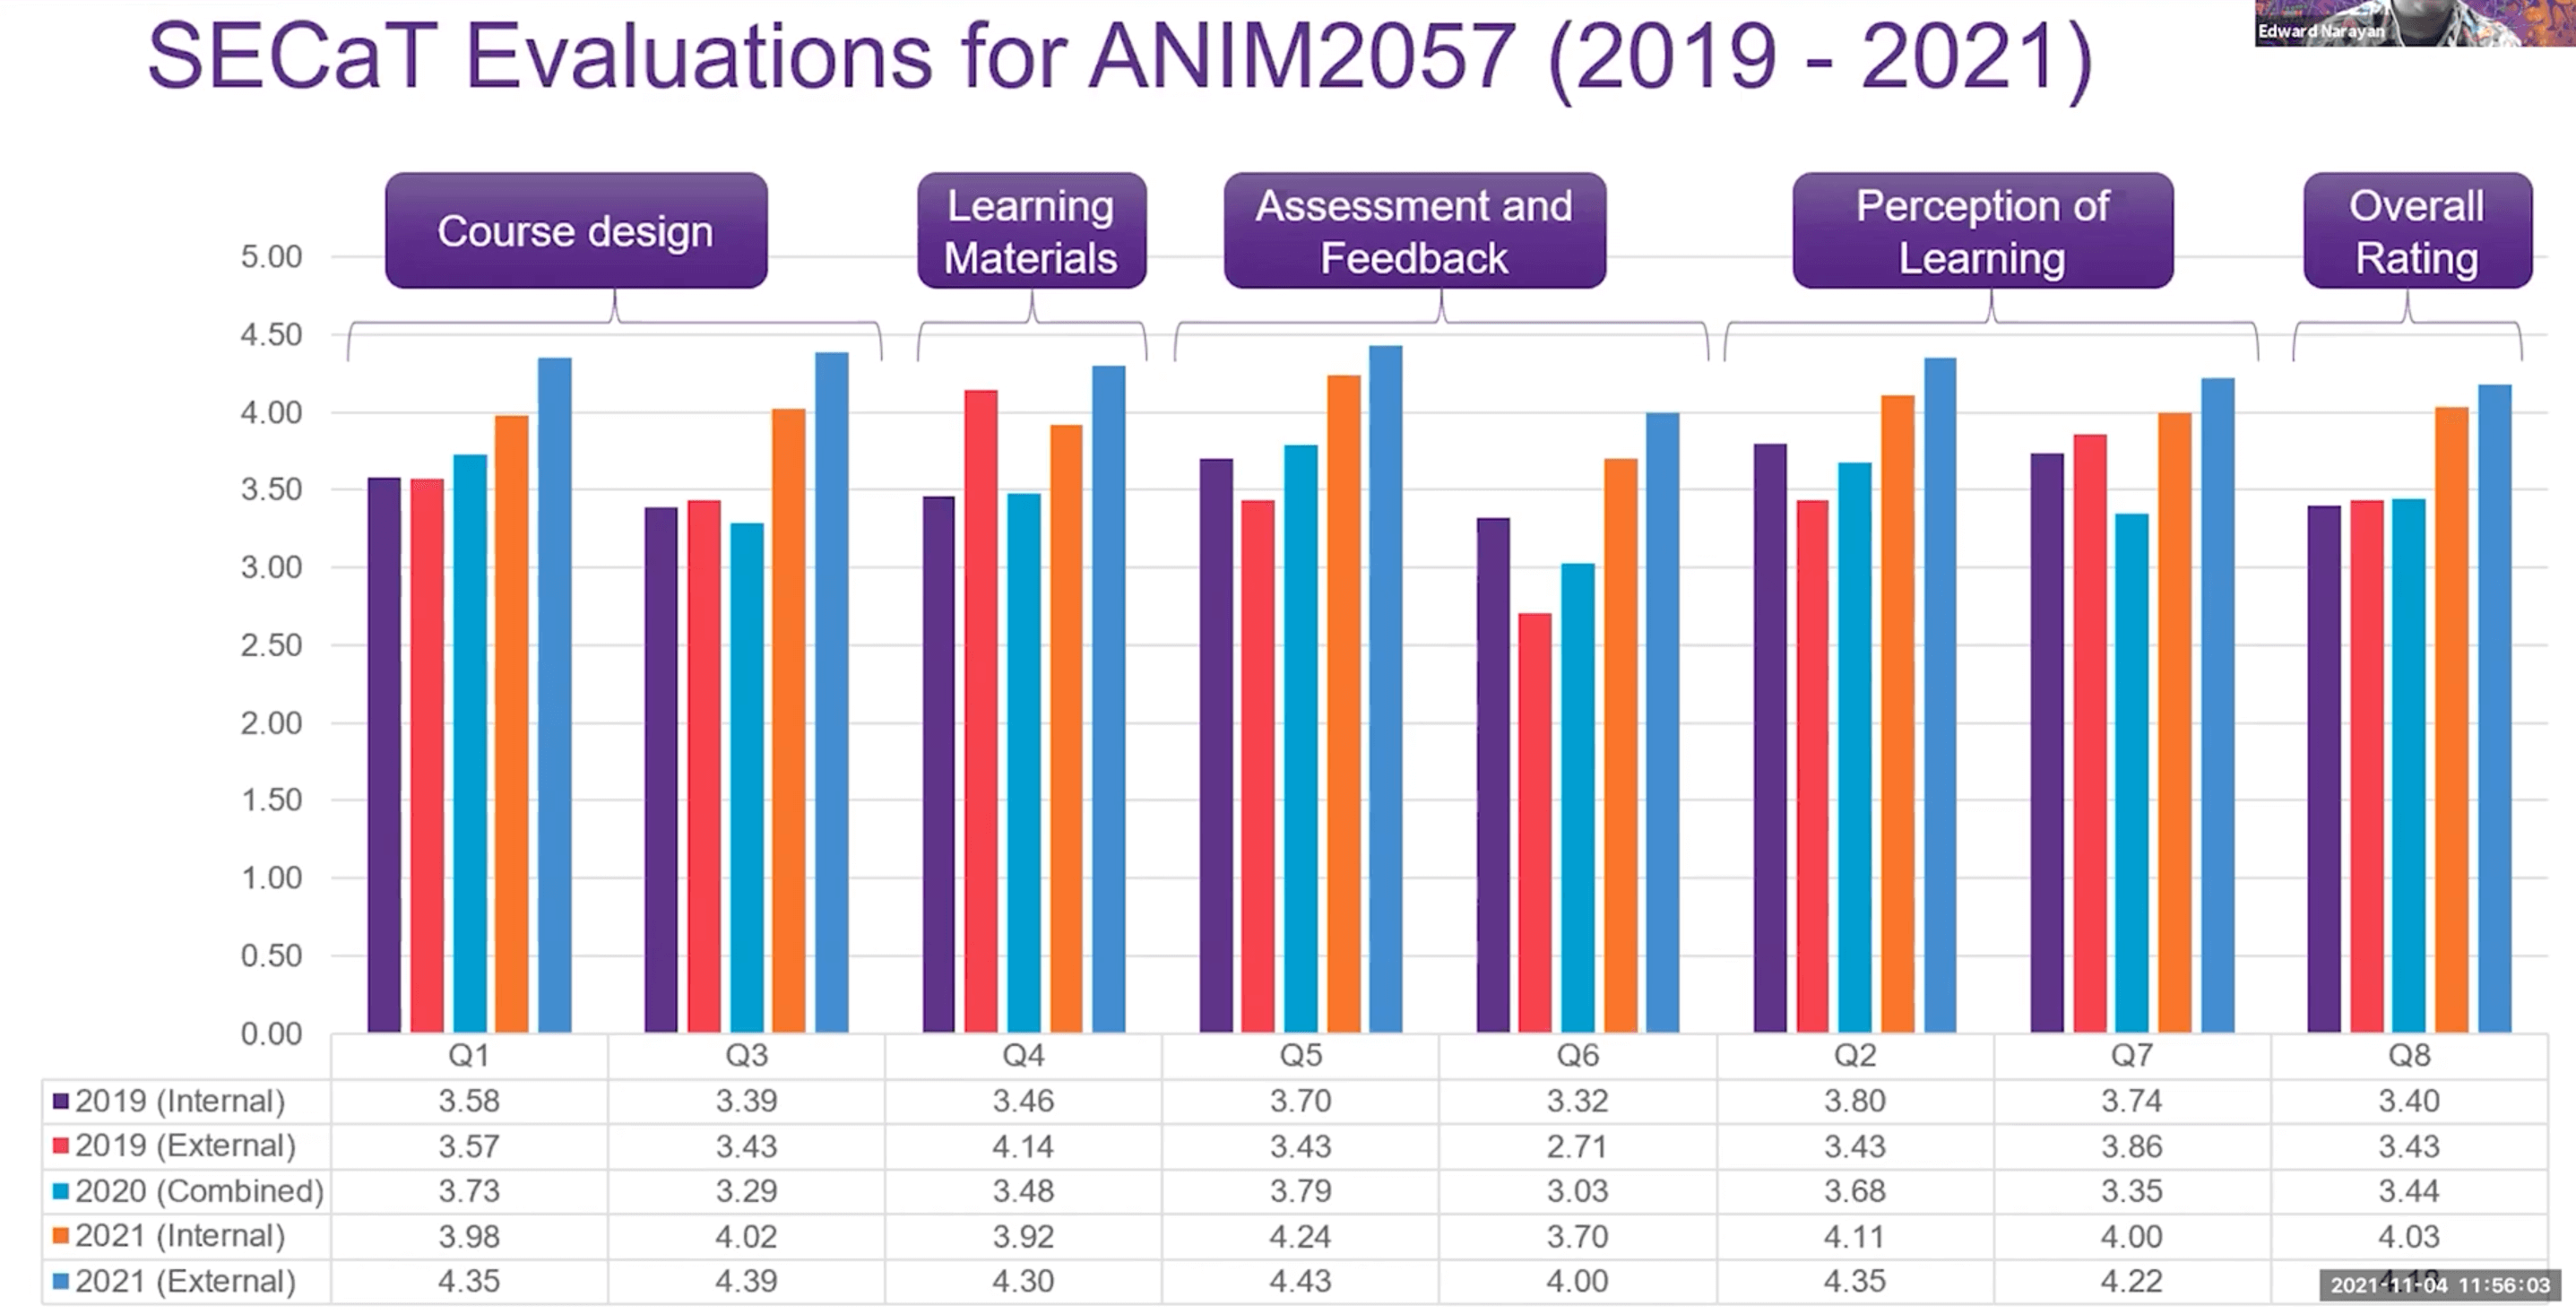 Internal evaluation scores (SECaT evaluations) for the paper ANIM2057 from the the years 2019 to 2021, showing a trend of increasing scores for course design, learning materials, assessment and feedback, perception of learning, and overall rating.